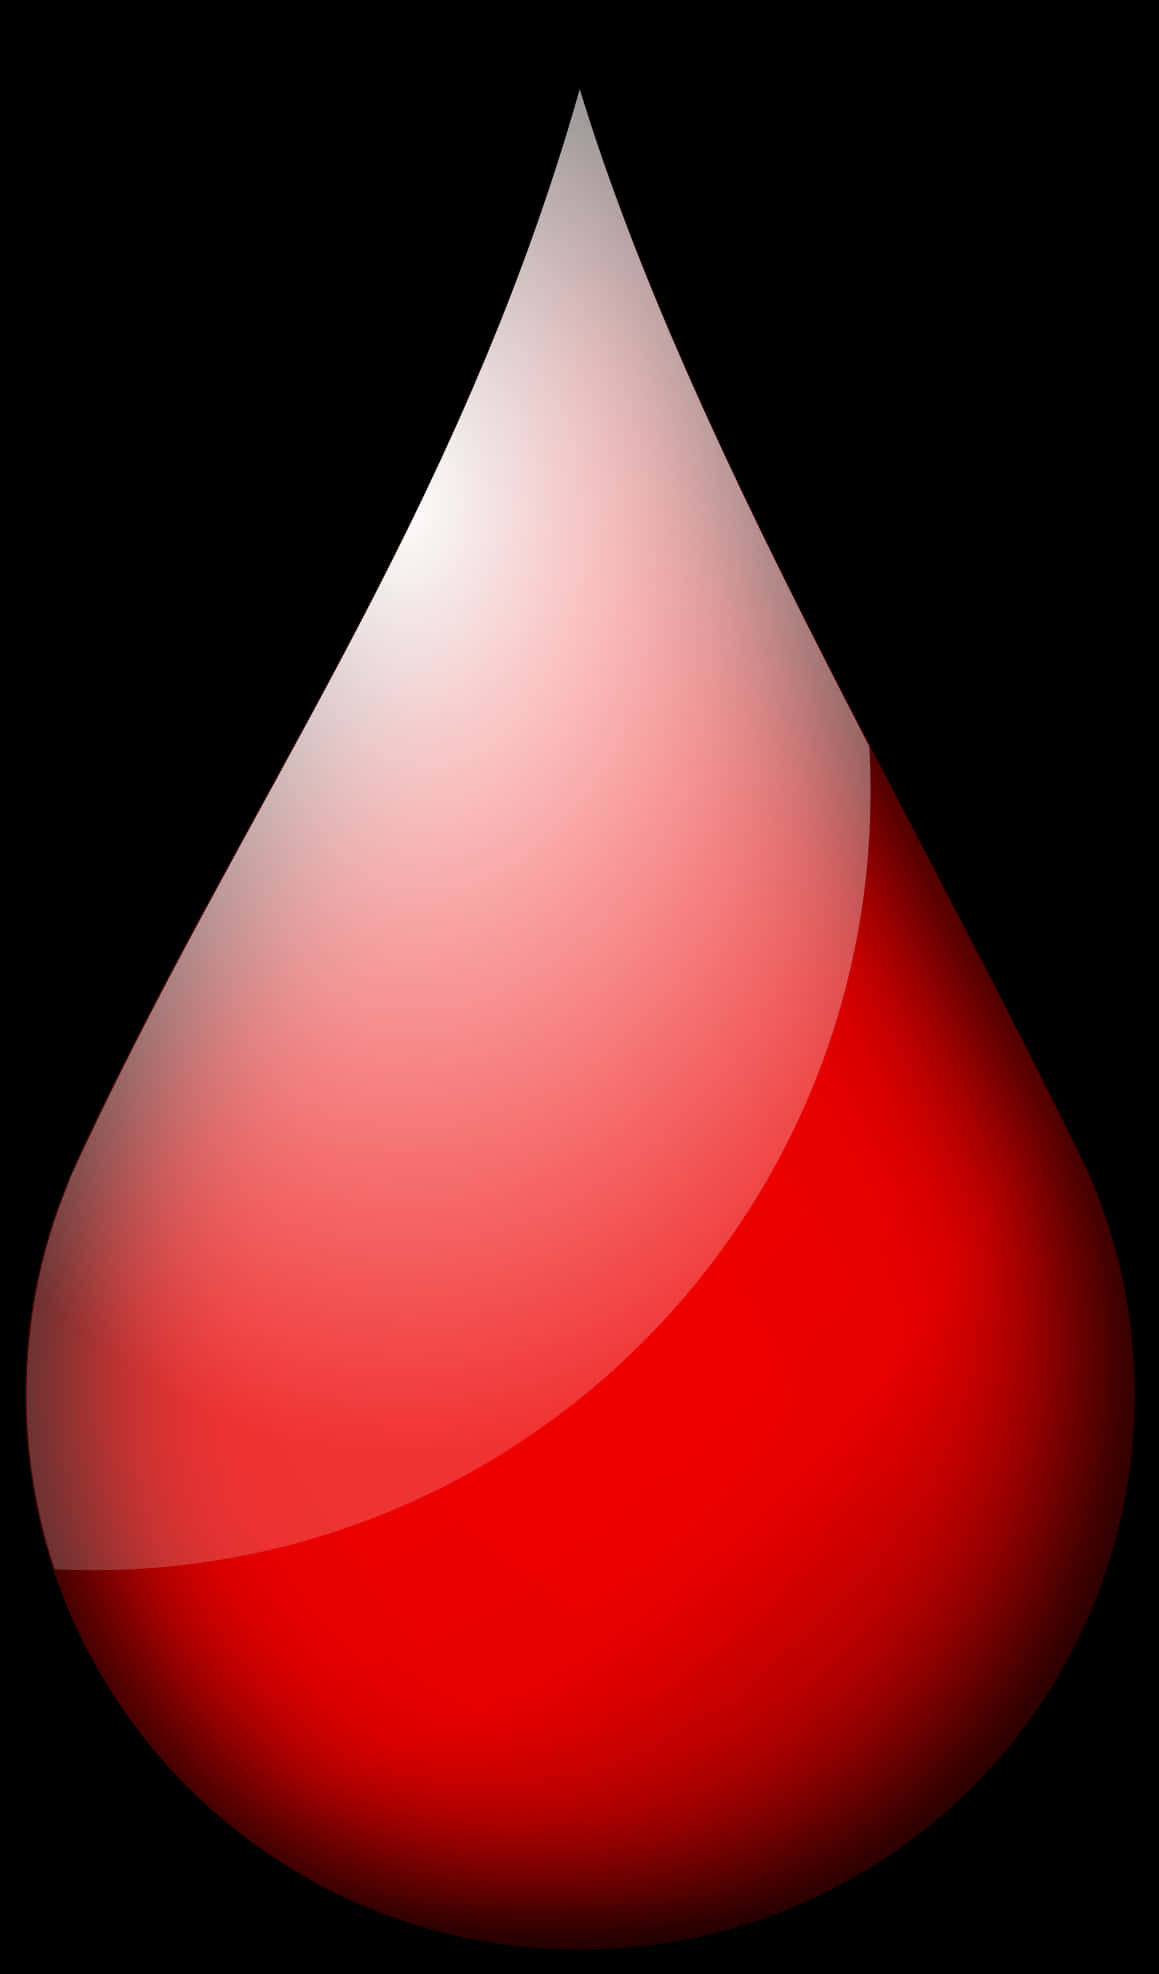 A Red And White Drop Of Blood